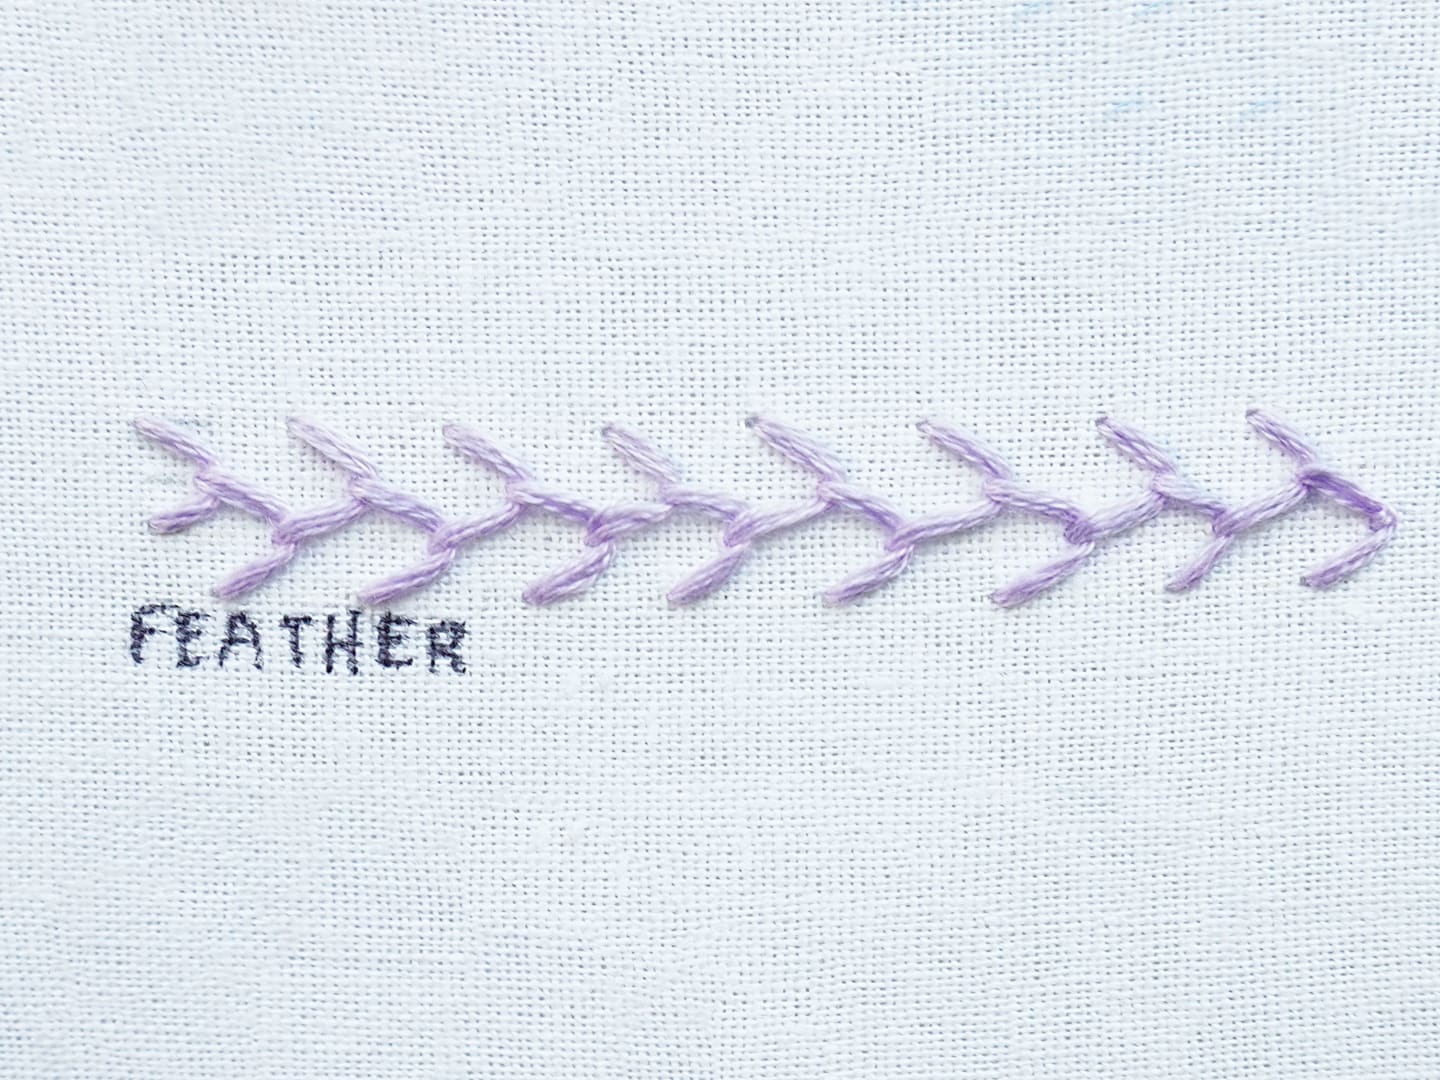 Feathered Chain Stitch in Hand Embroidery (Step By Step & Video)